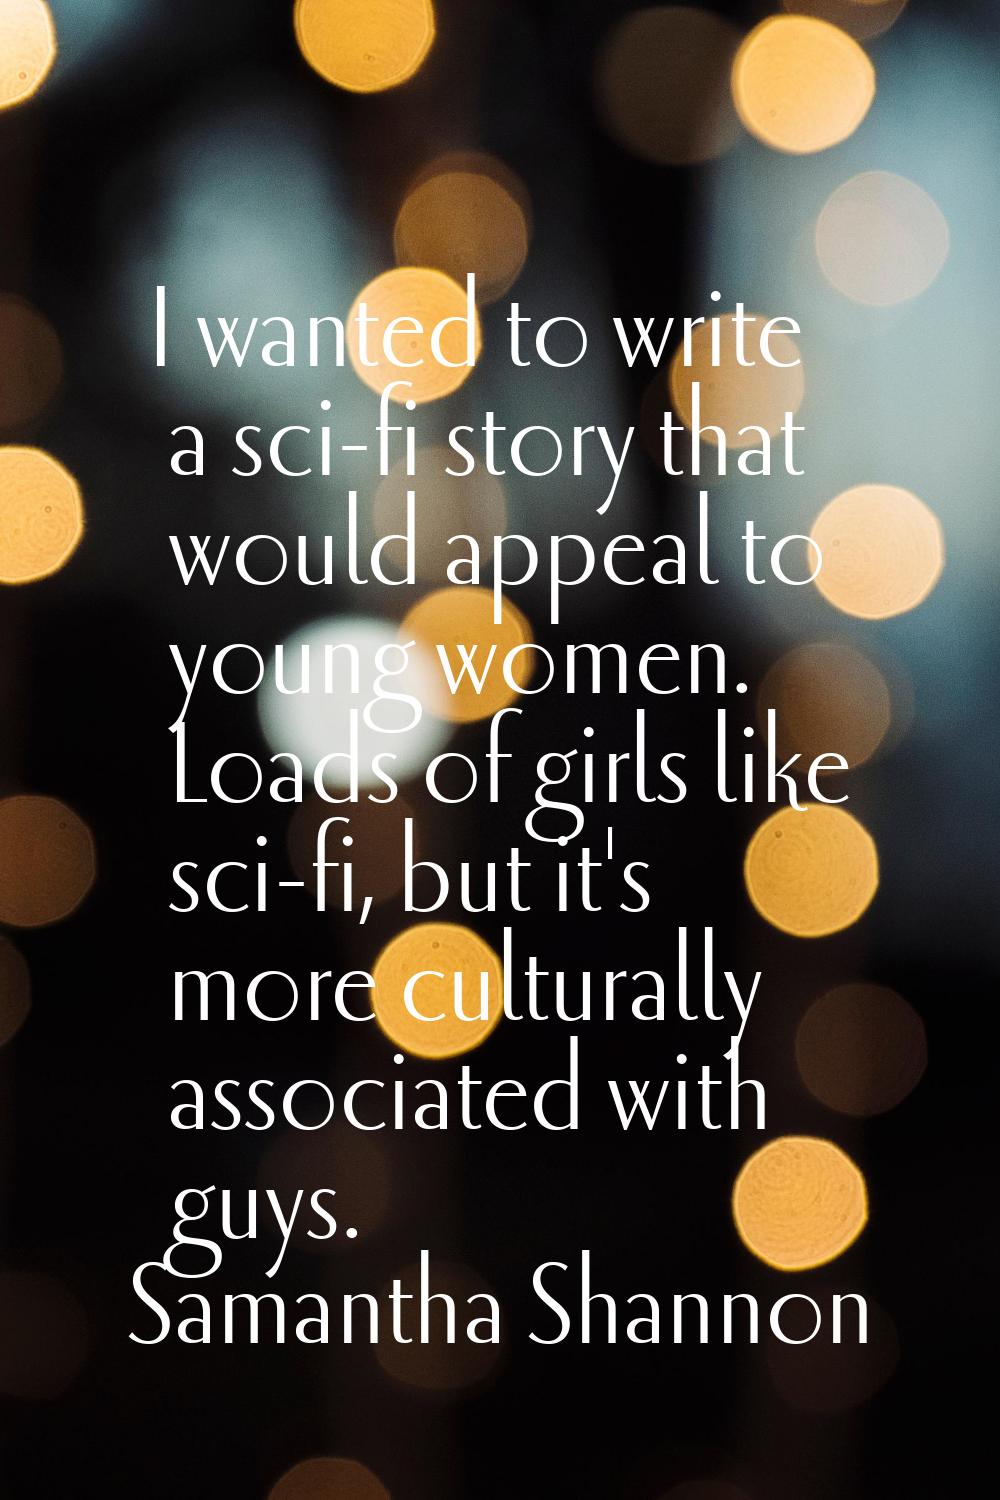 I wanted to write a sci-fi story that would appeal to young women. Loads of girls like sci-fi, but 